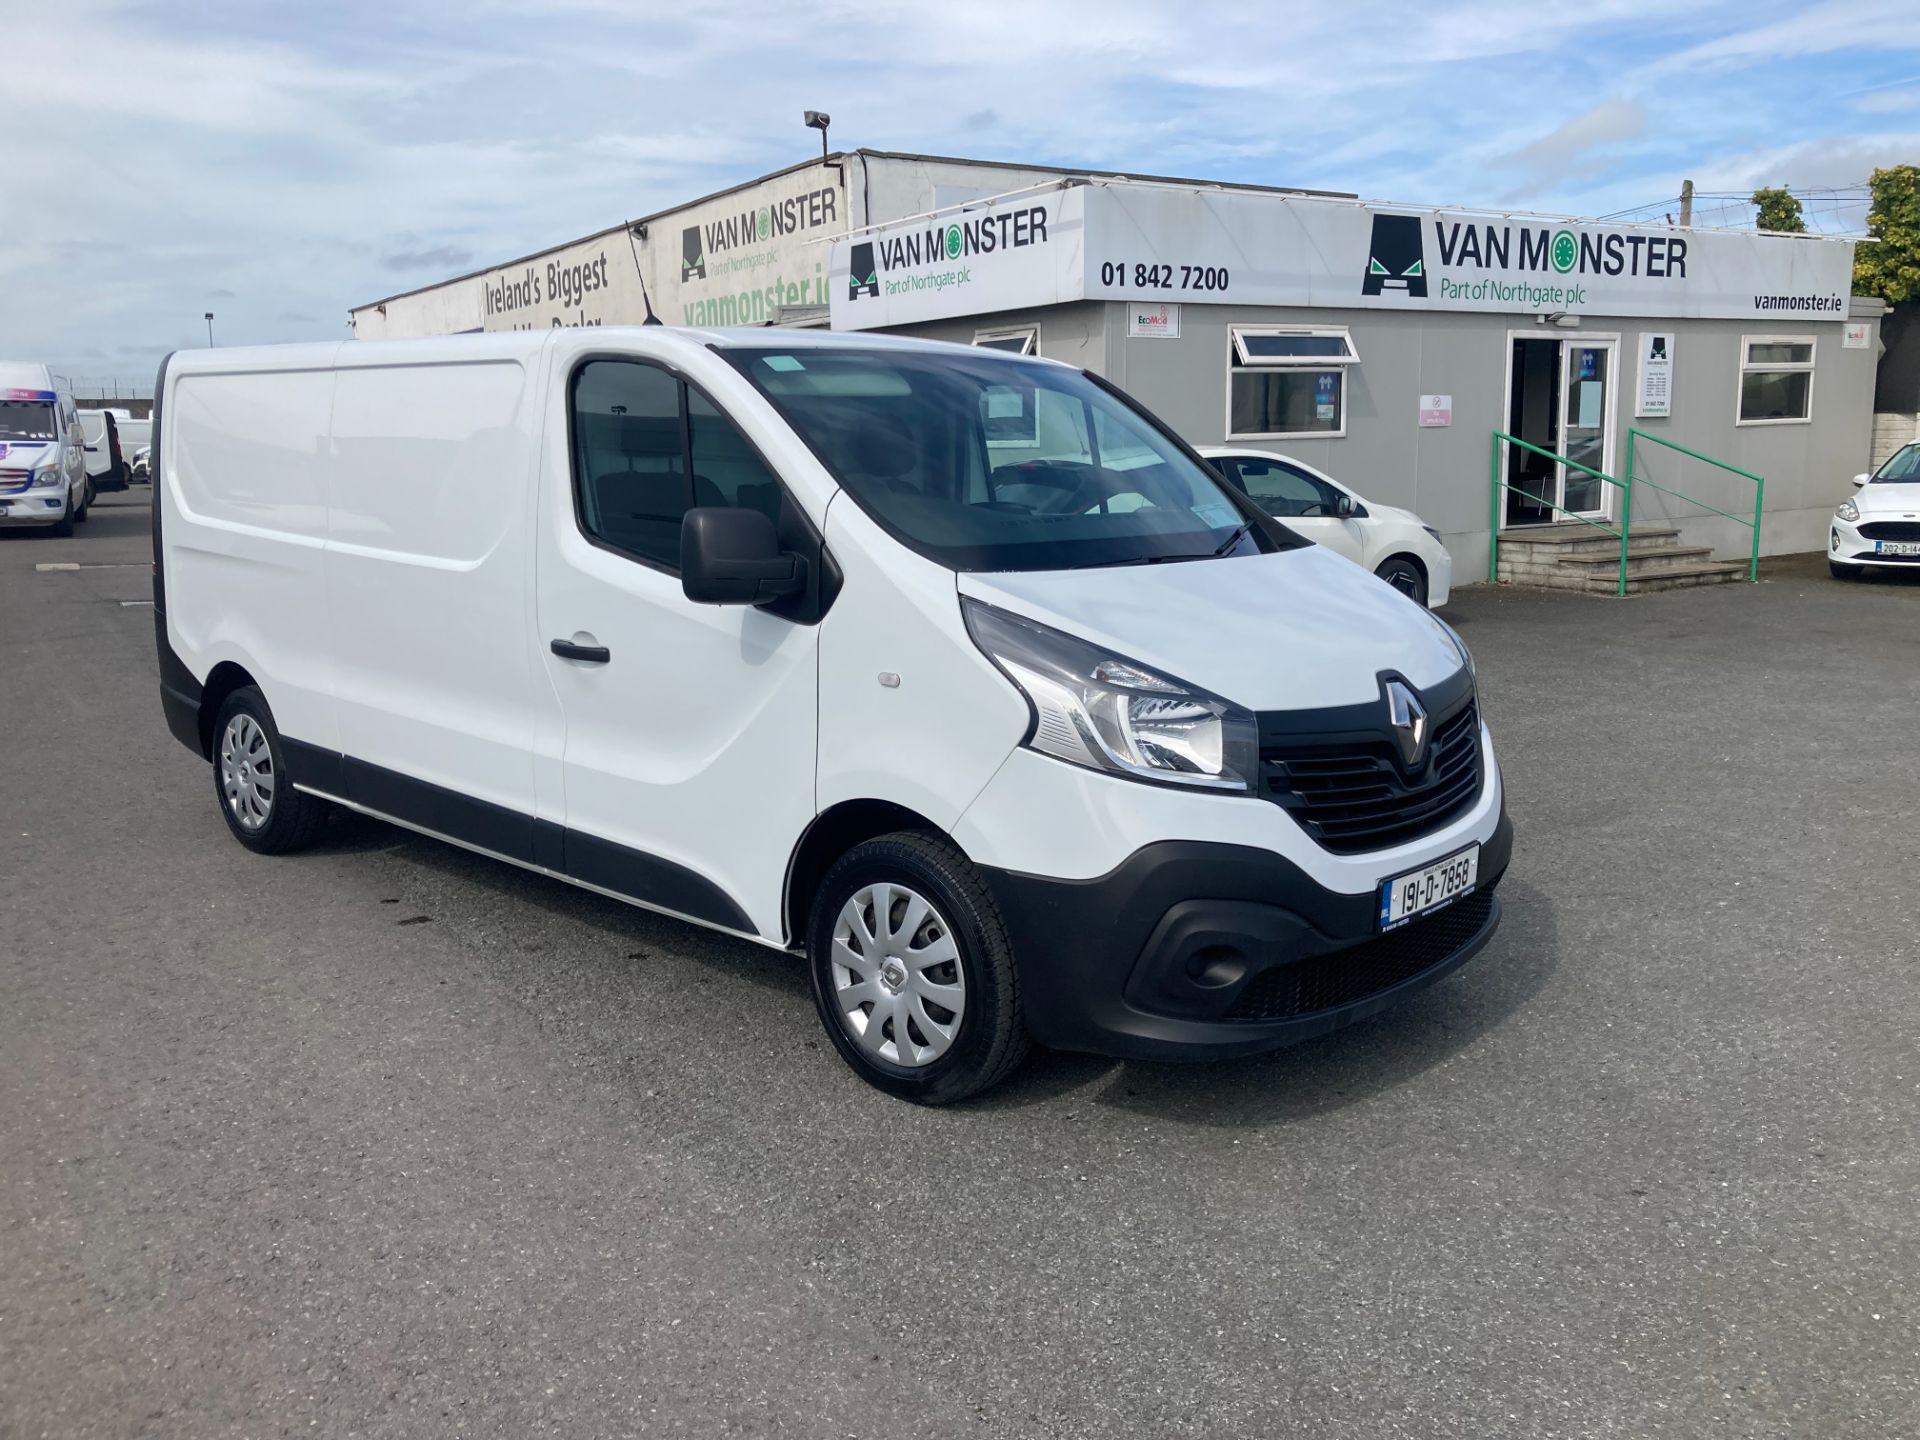 2019 Renault Trafic LL29 DCI 120 Business (191D7858)